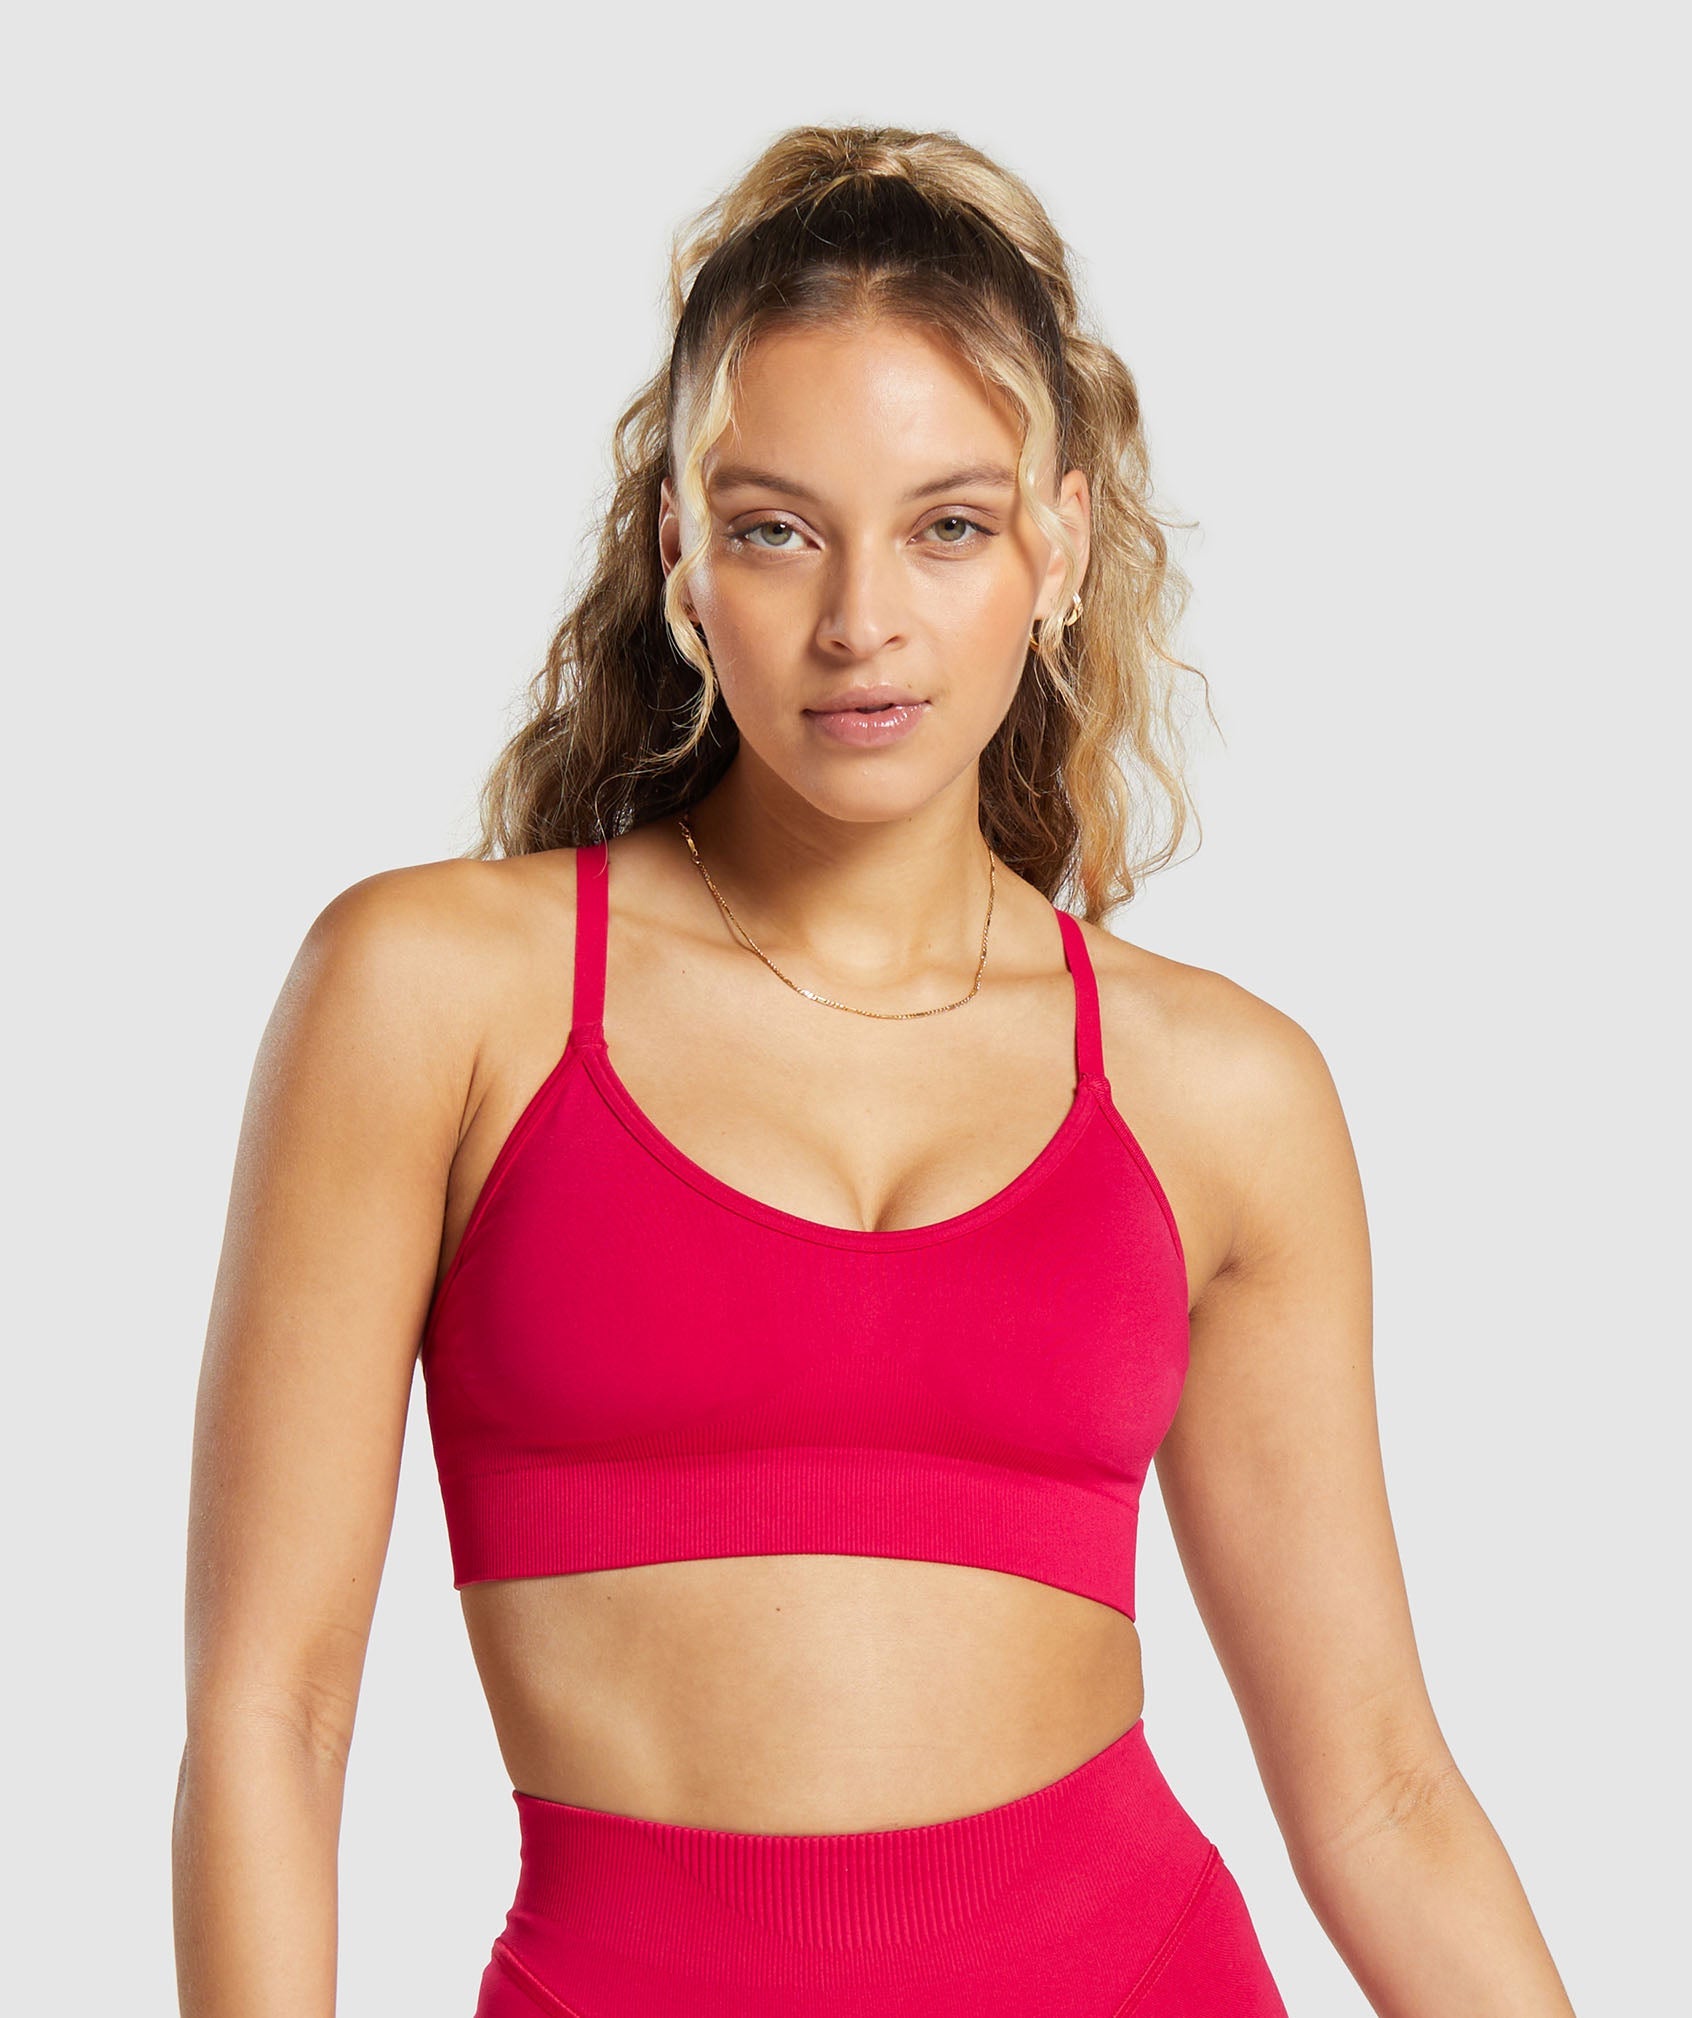 Gymshark sports bra with suspender straps and zip front size Xs/Sm - $23 -  From Jami